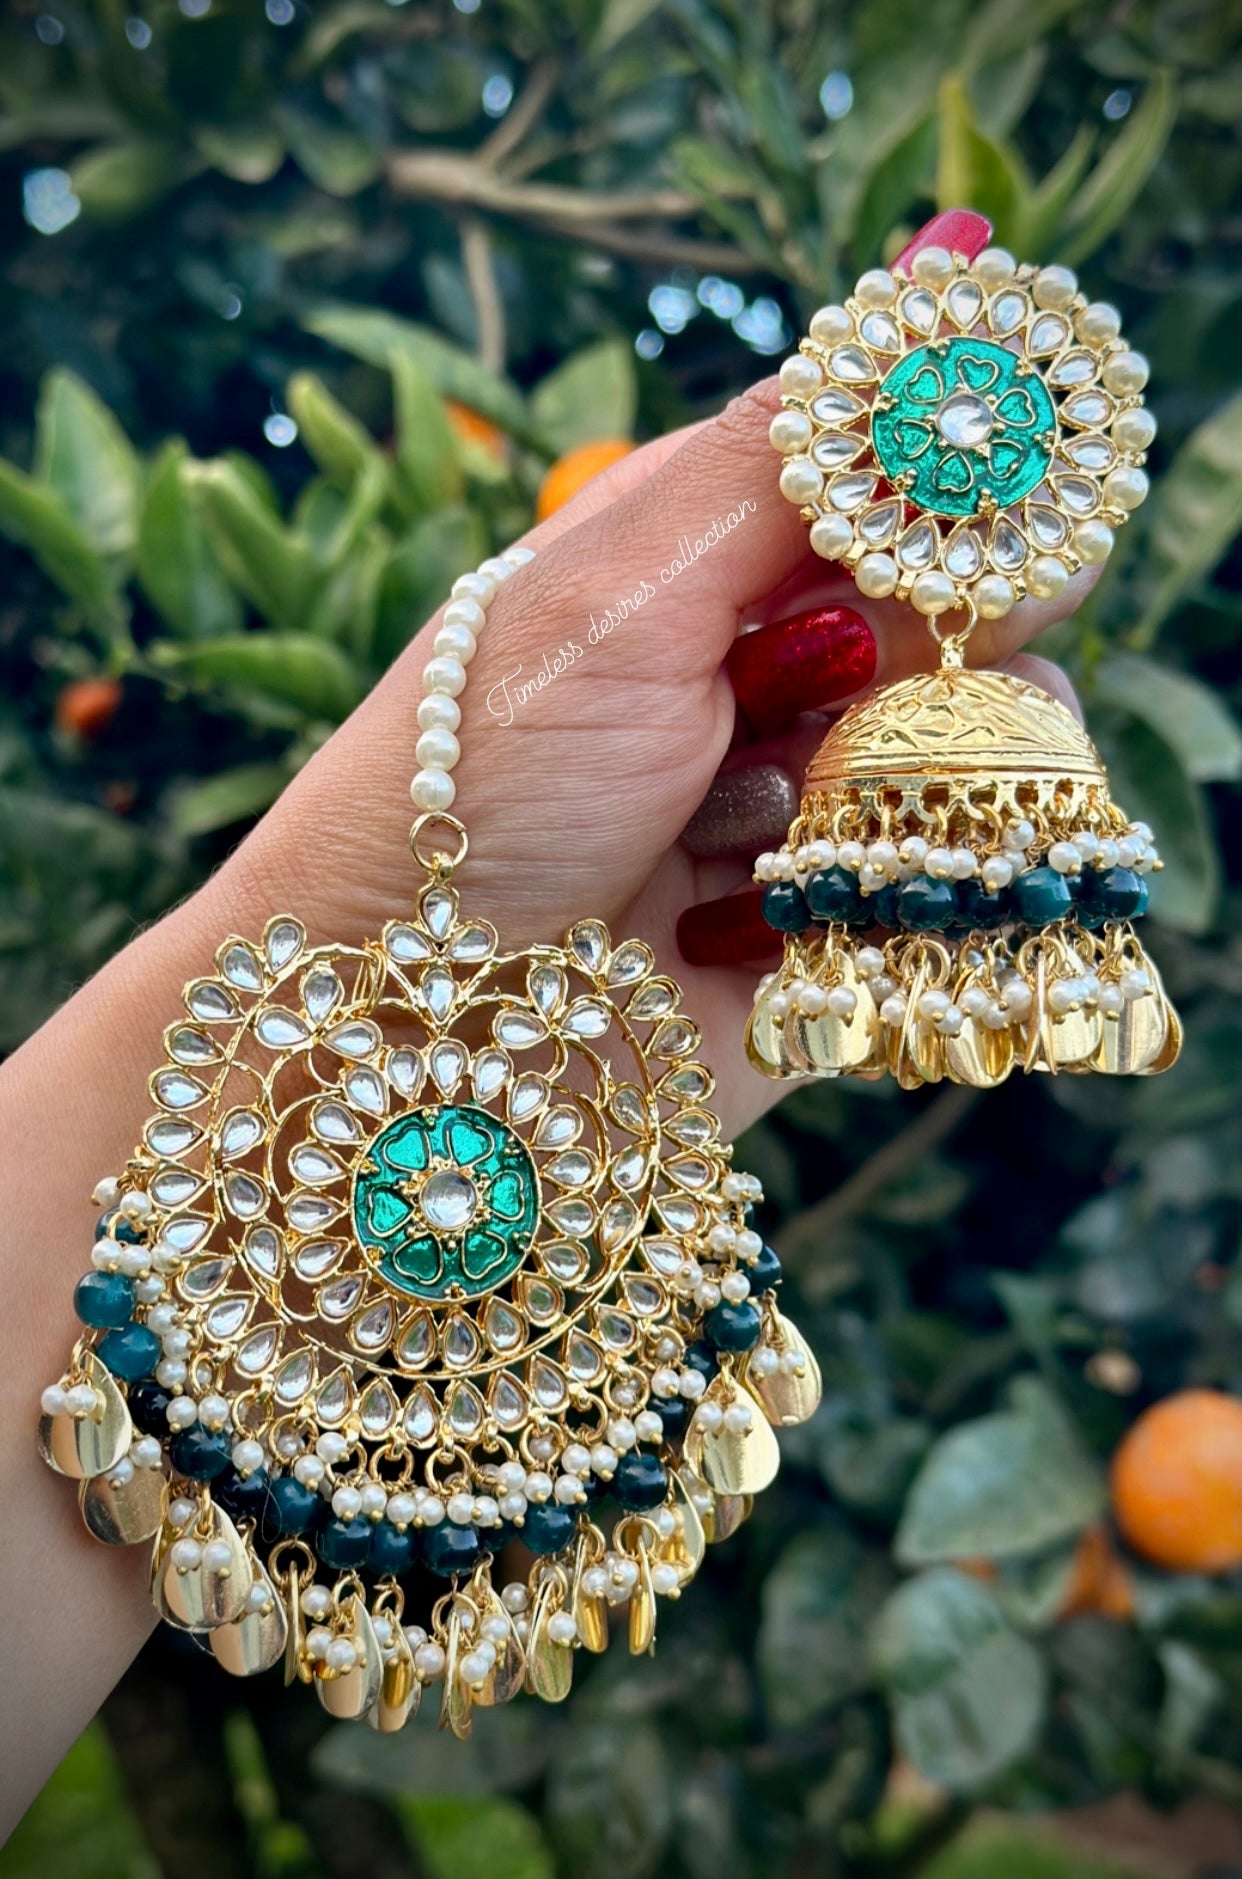 Gold Plated Pearls and Peepal Patti Danglers Earrings cum Maang Tikka Set -  PINK PITCH - 2586632